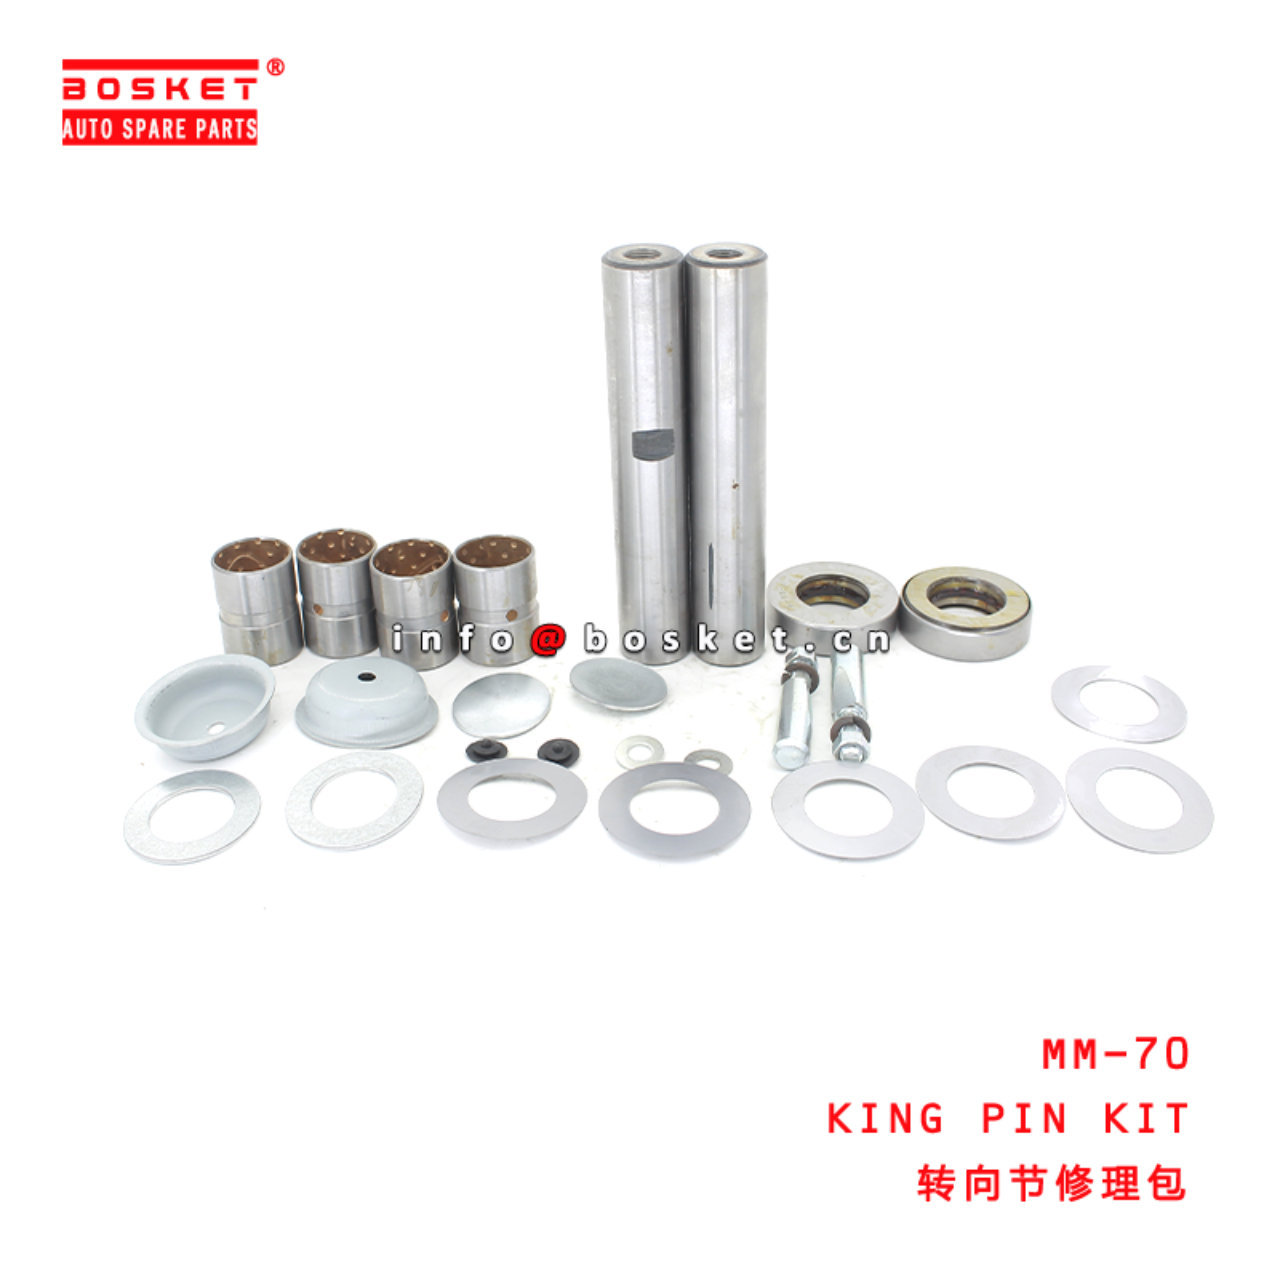 MM-70 King Pin Kit Suitable for ISUZU